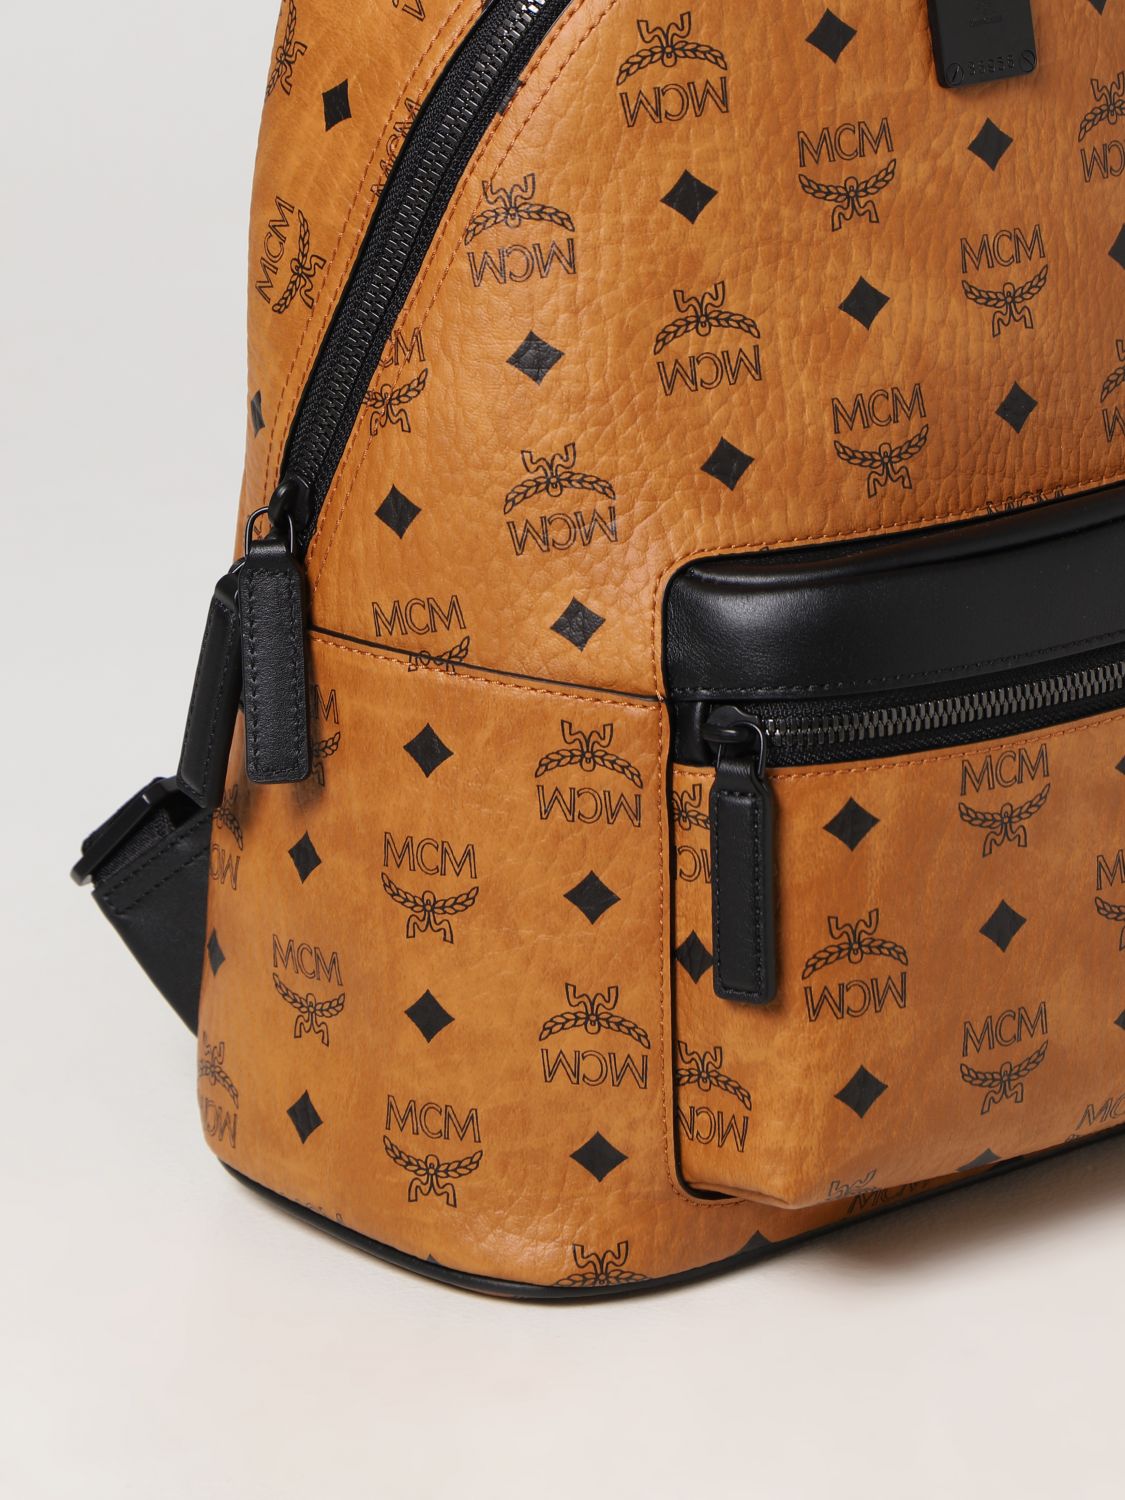 HOW TO: Tell the Difference Between a REAL/FAKE MCM Backpack 